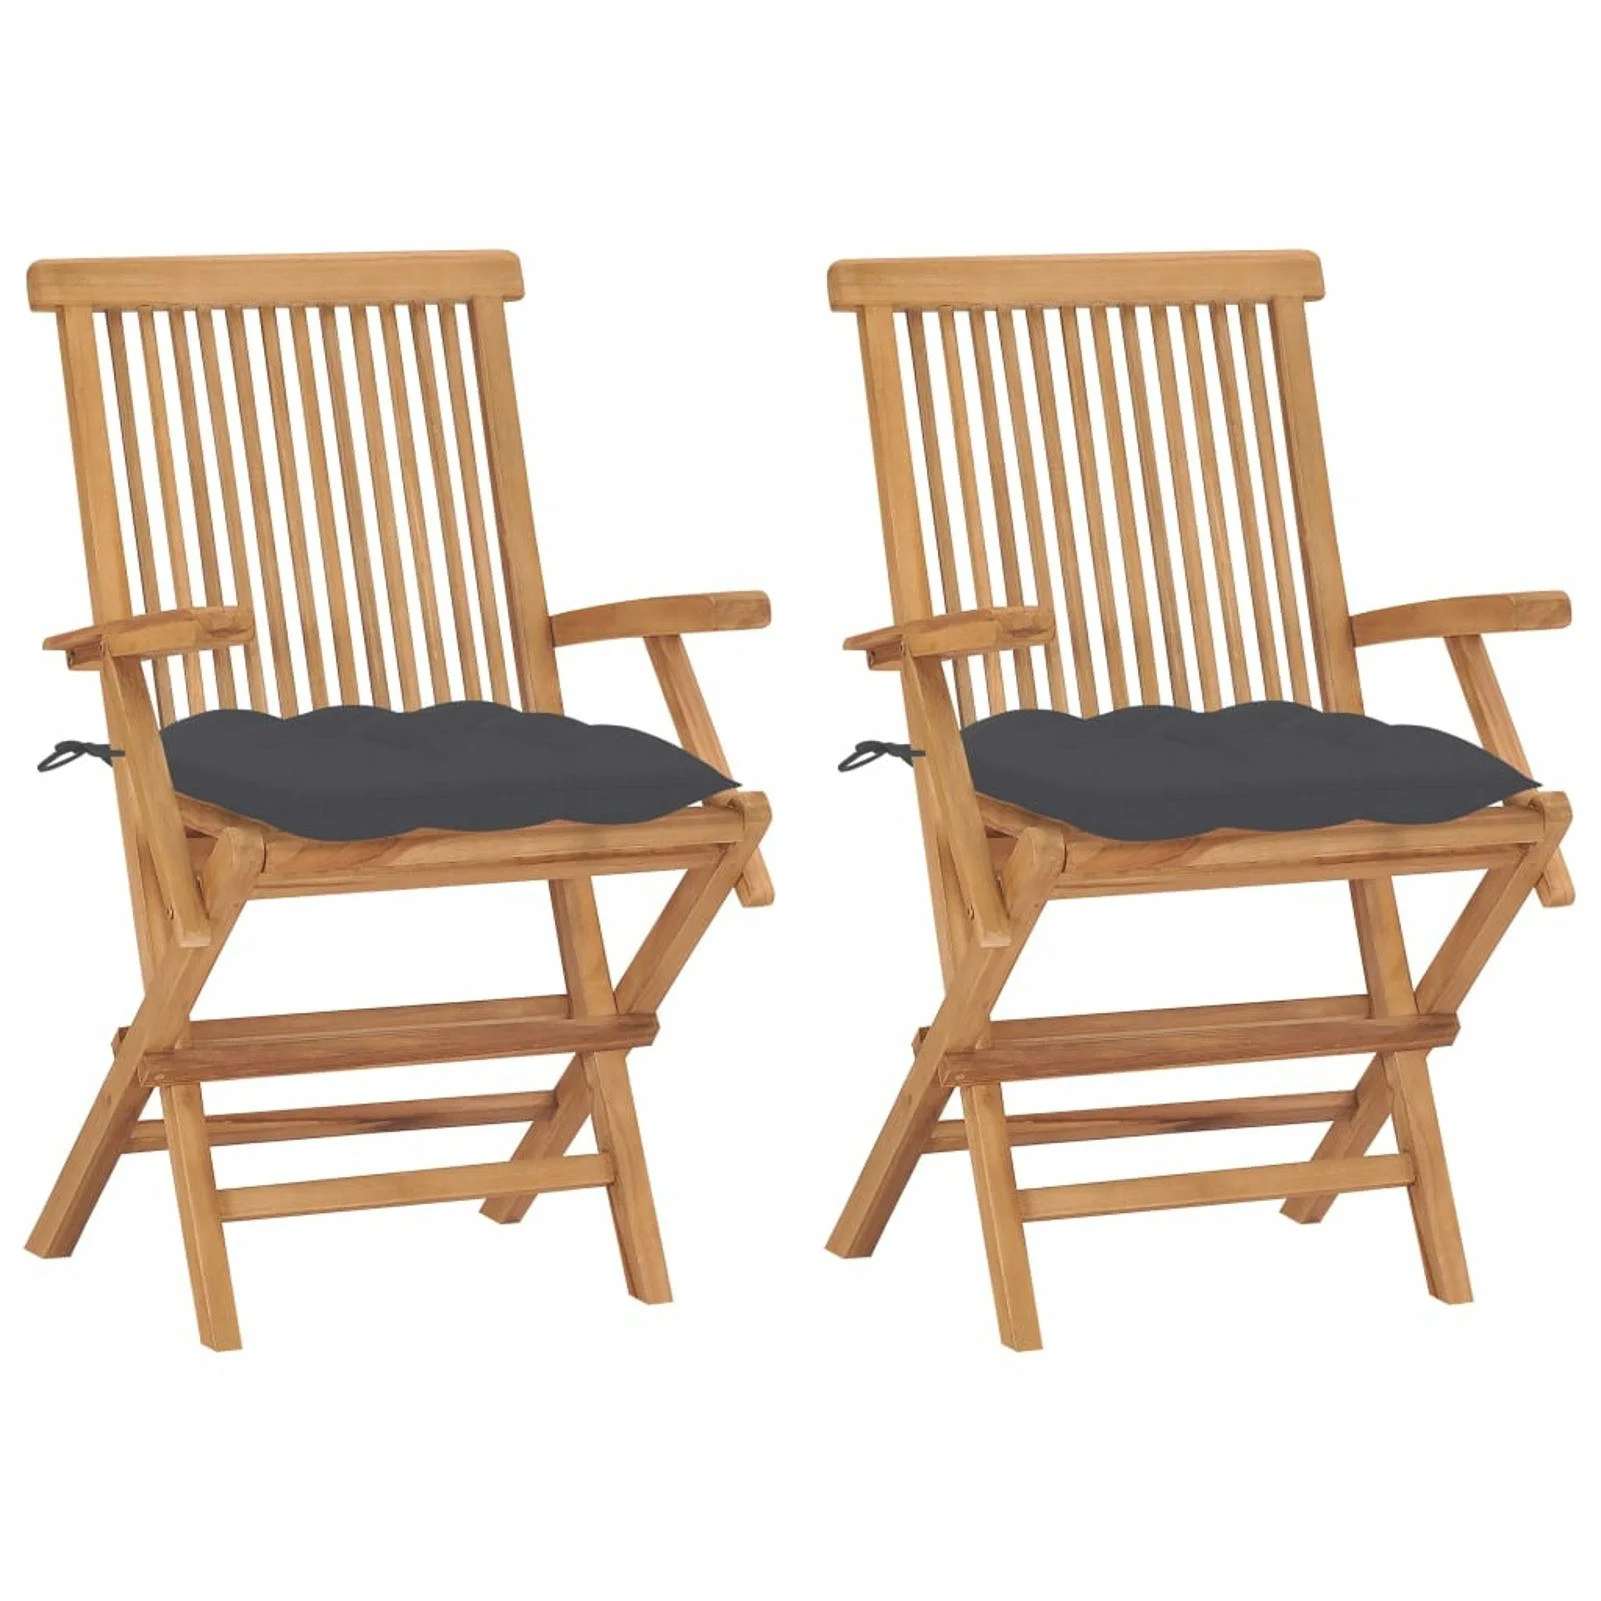 

Patio Chairs with Anthracite Cushions 2 pcs Solid Teak Wood